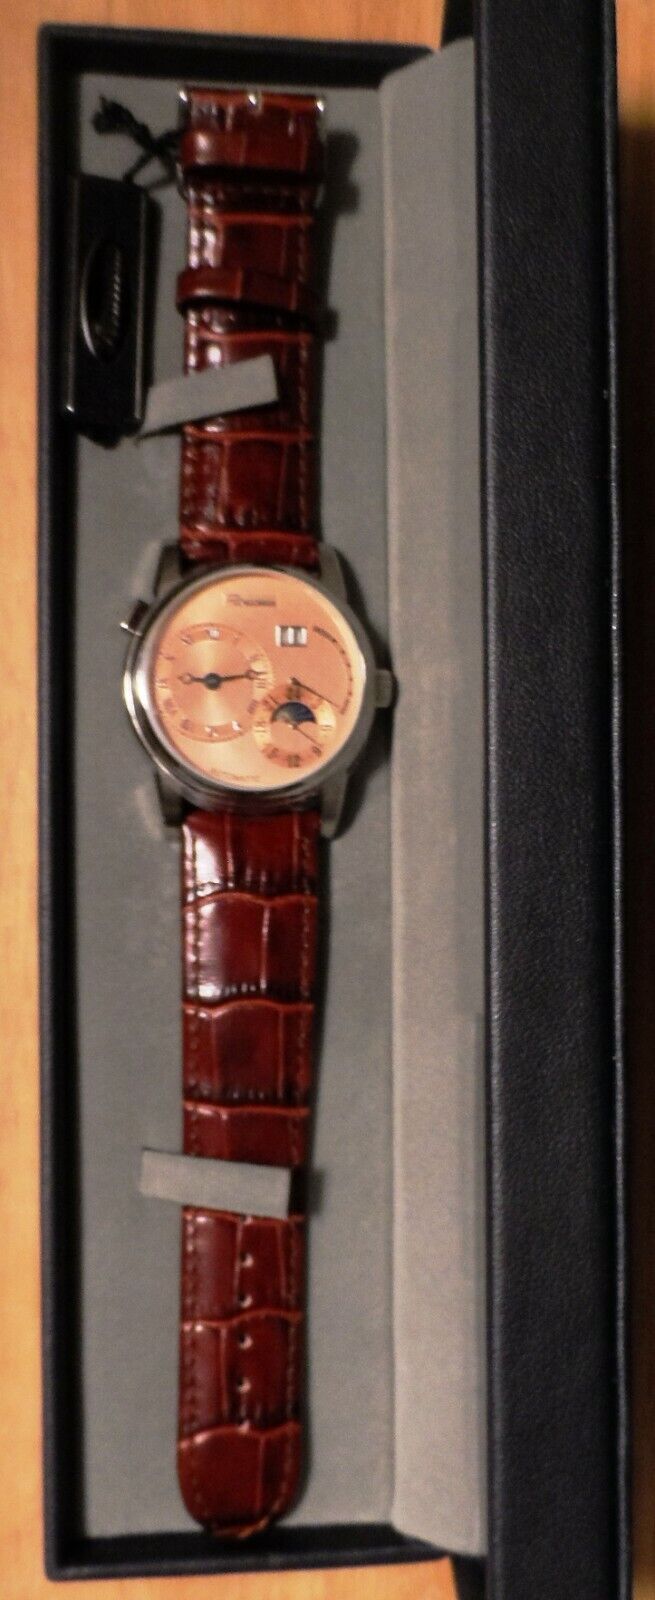 Rousseau Automatic Wristwatch - Self-Winding - Never Worn - REDUCED!!!